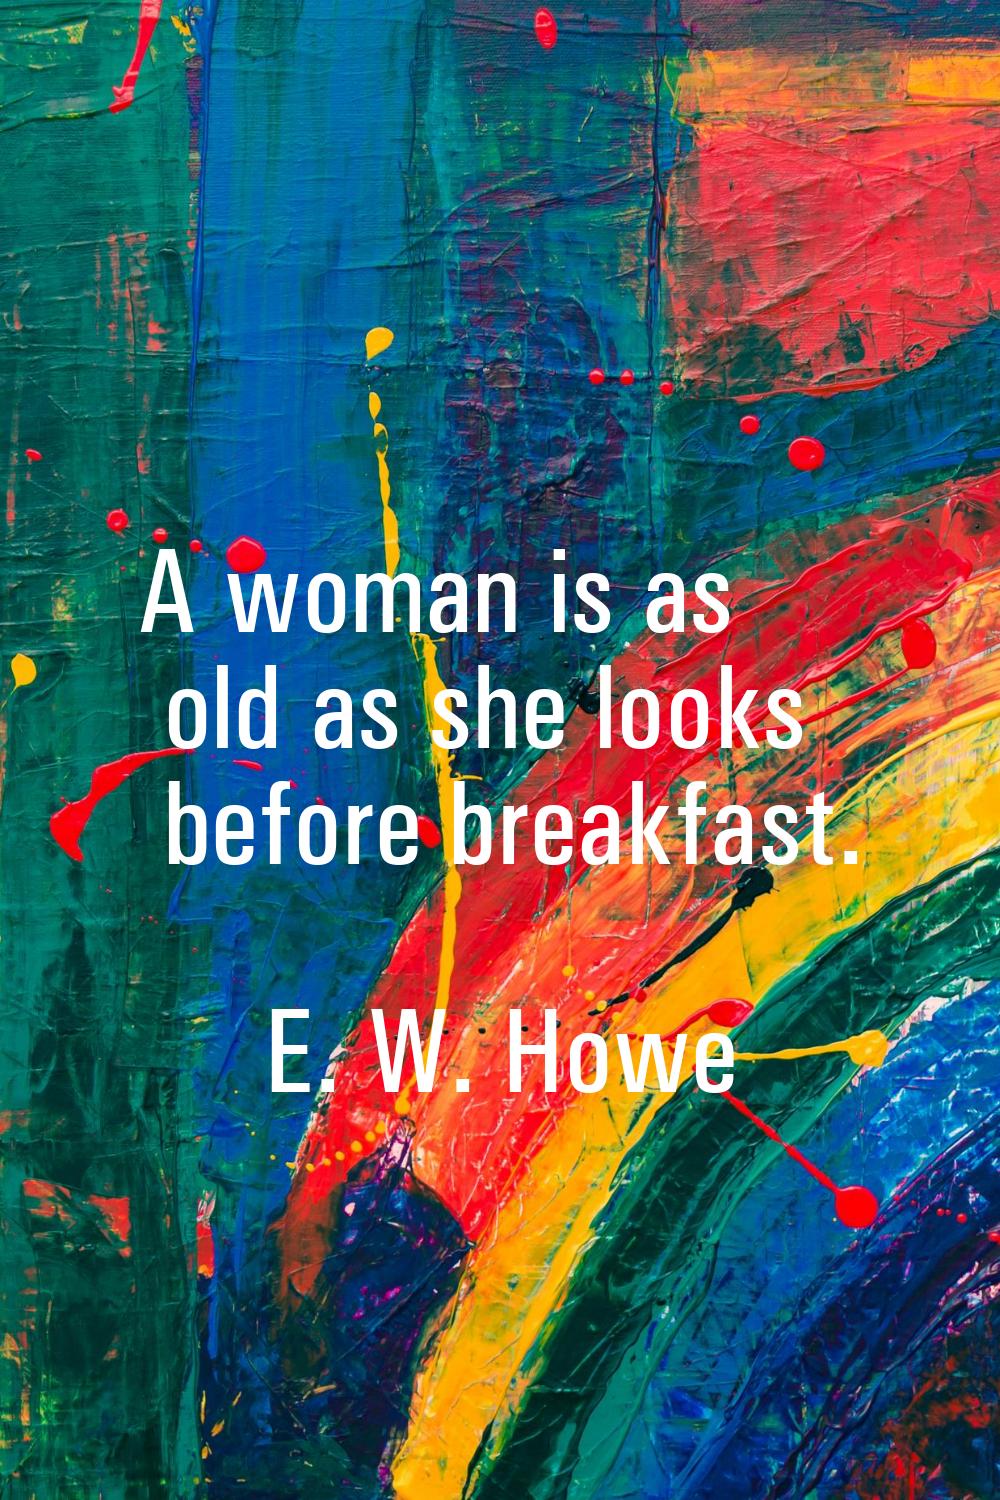 A woman is as old as she looks before breakfast.